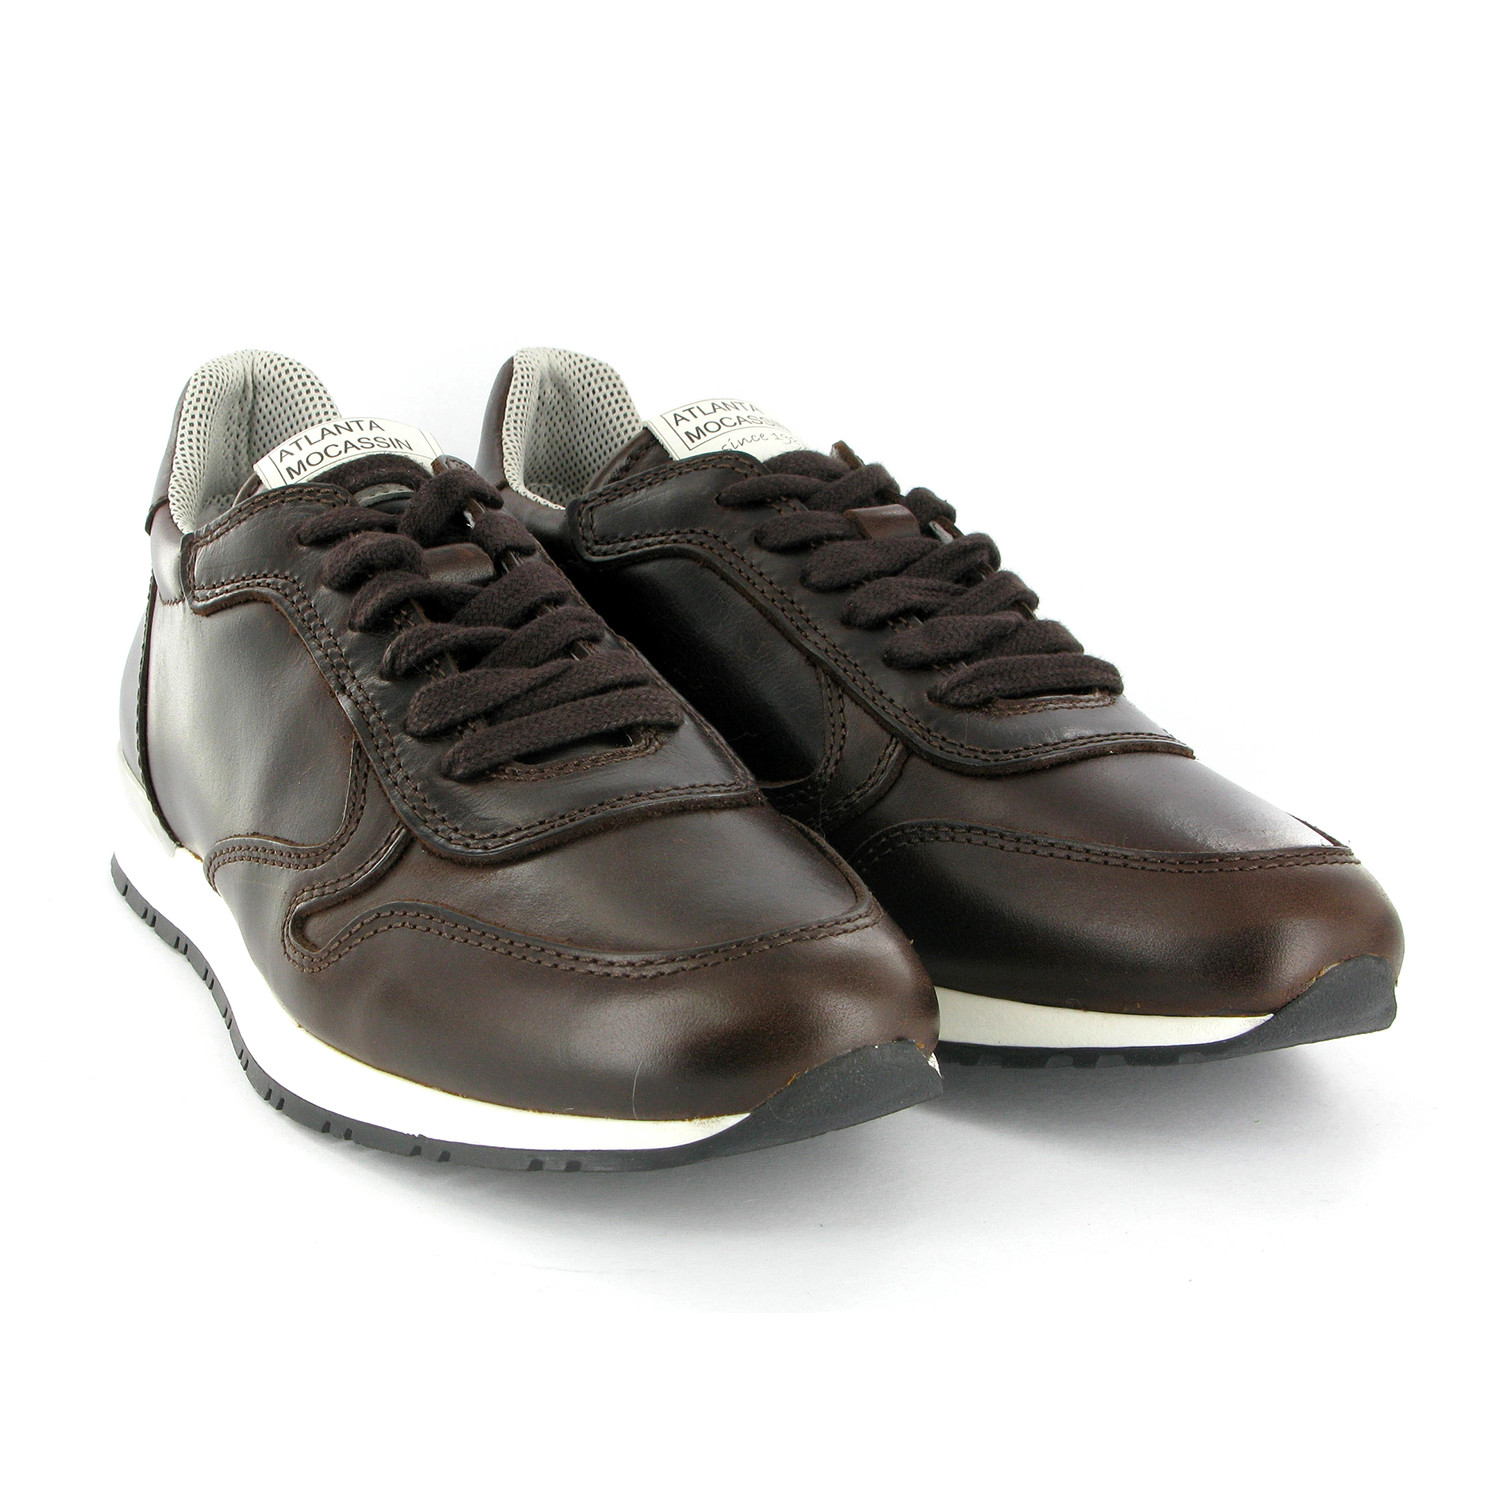 leather jogging shoes